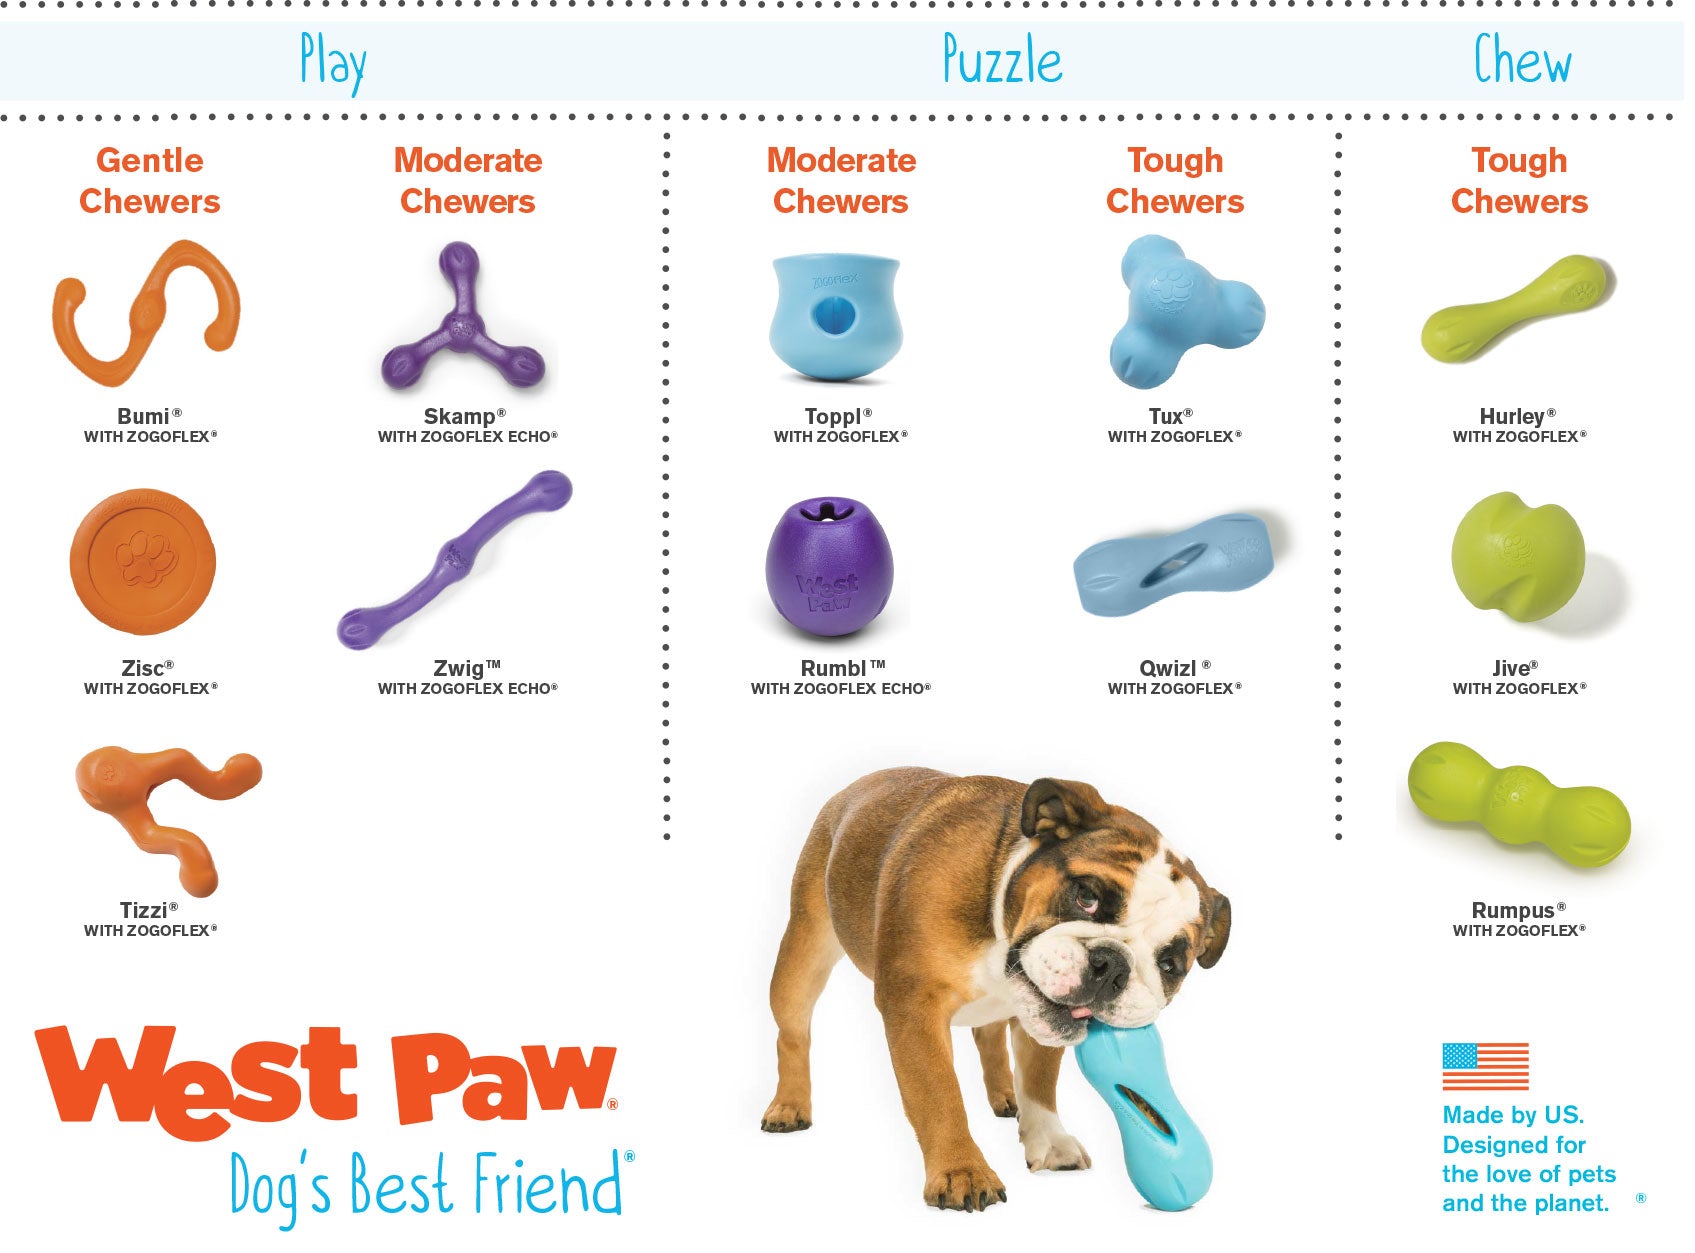 How to choose a West Paw toy for your dog